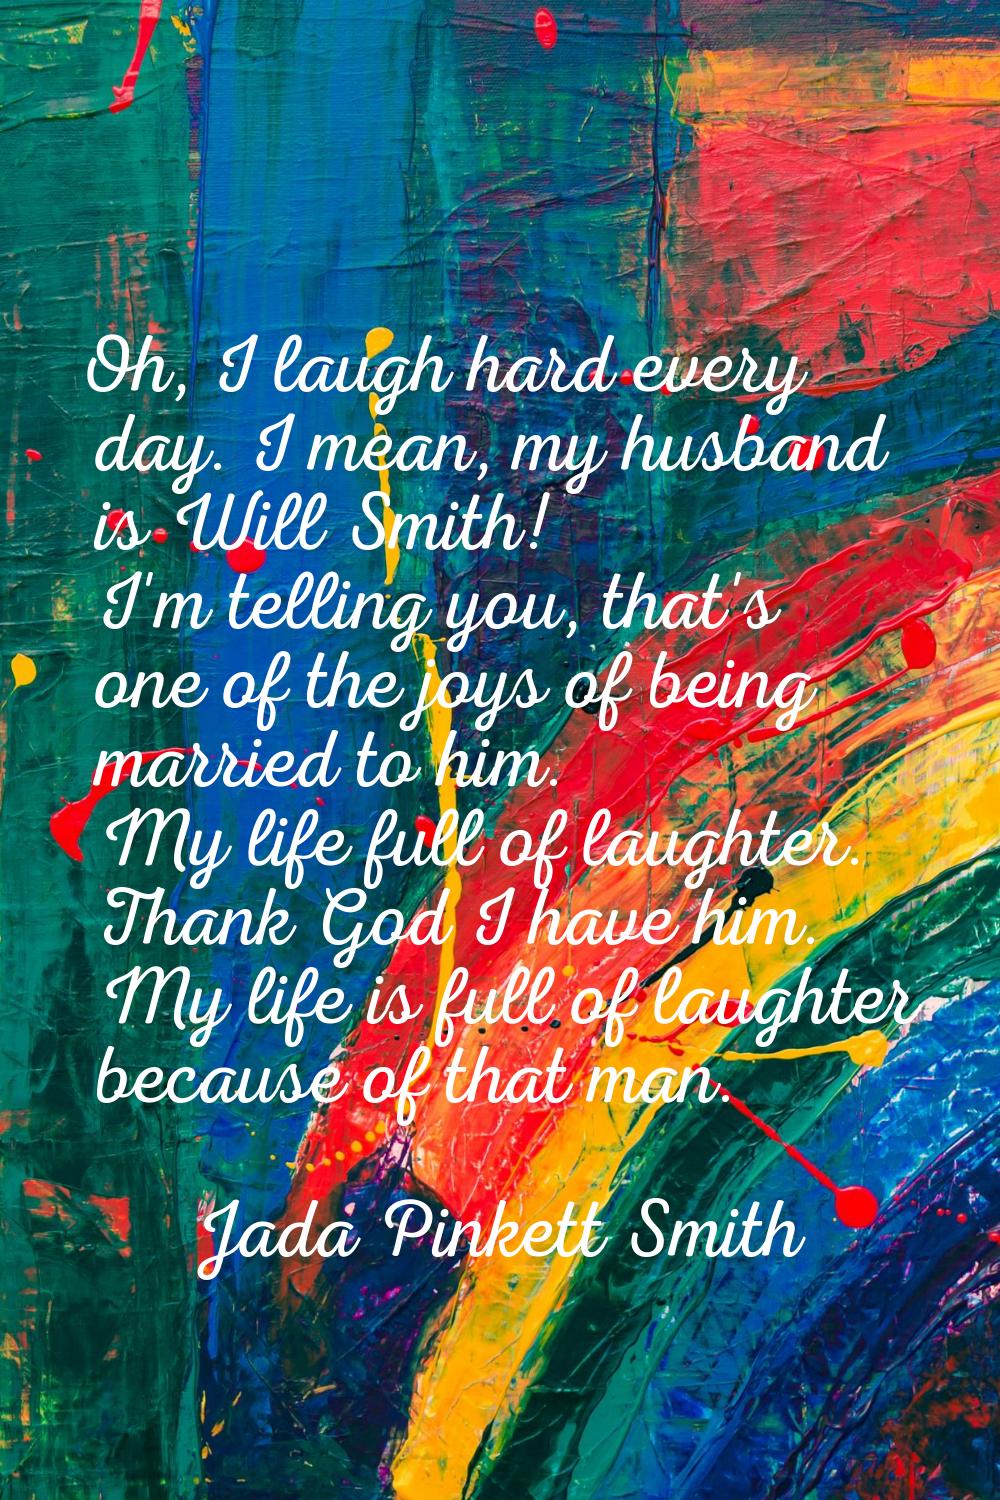 Oh, I laugh hard every day. I mean, my husband is Will Smith! I'm telling you, that's one of the jo